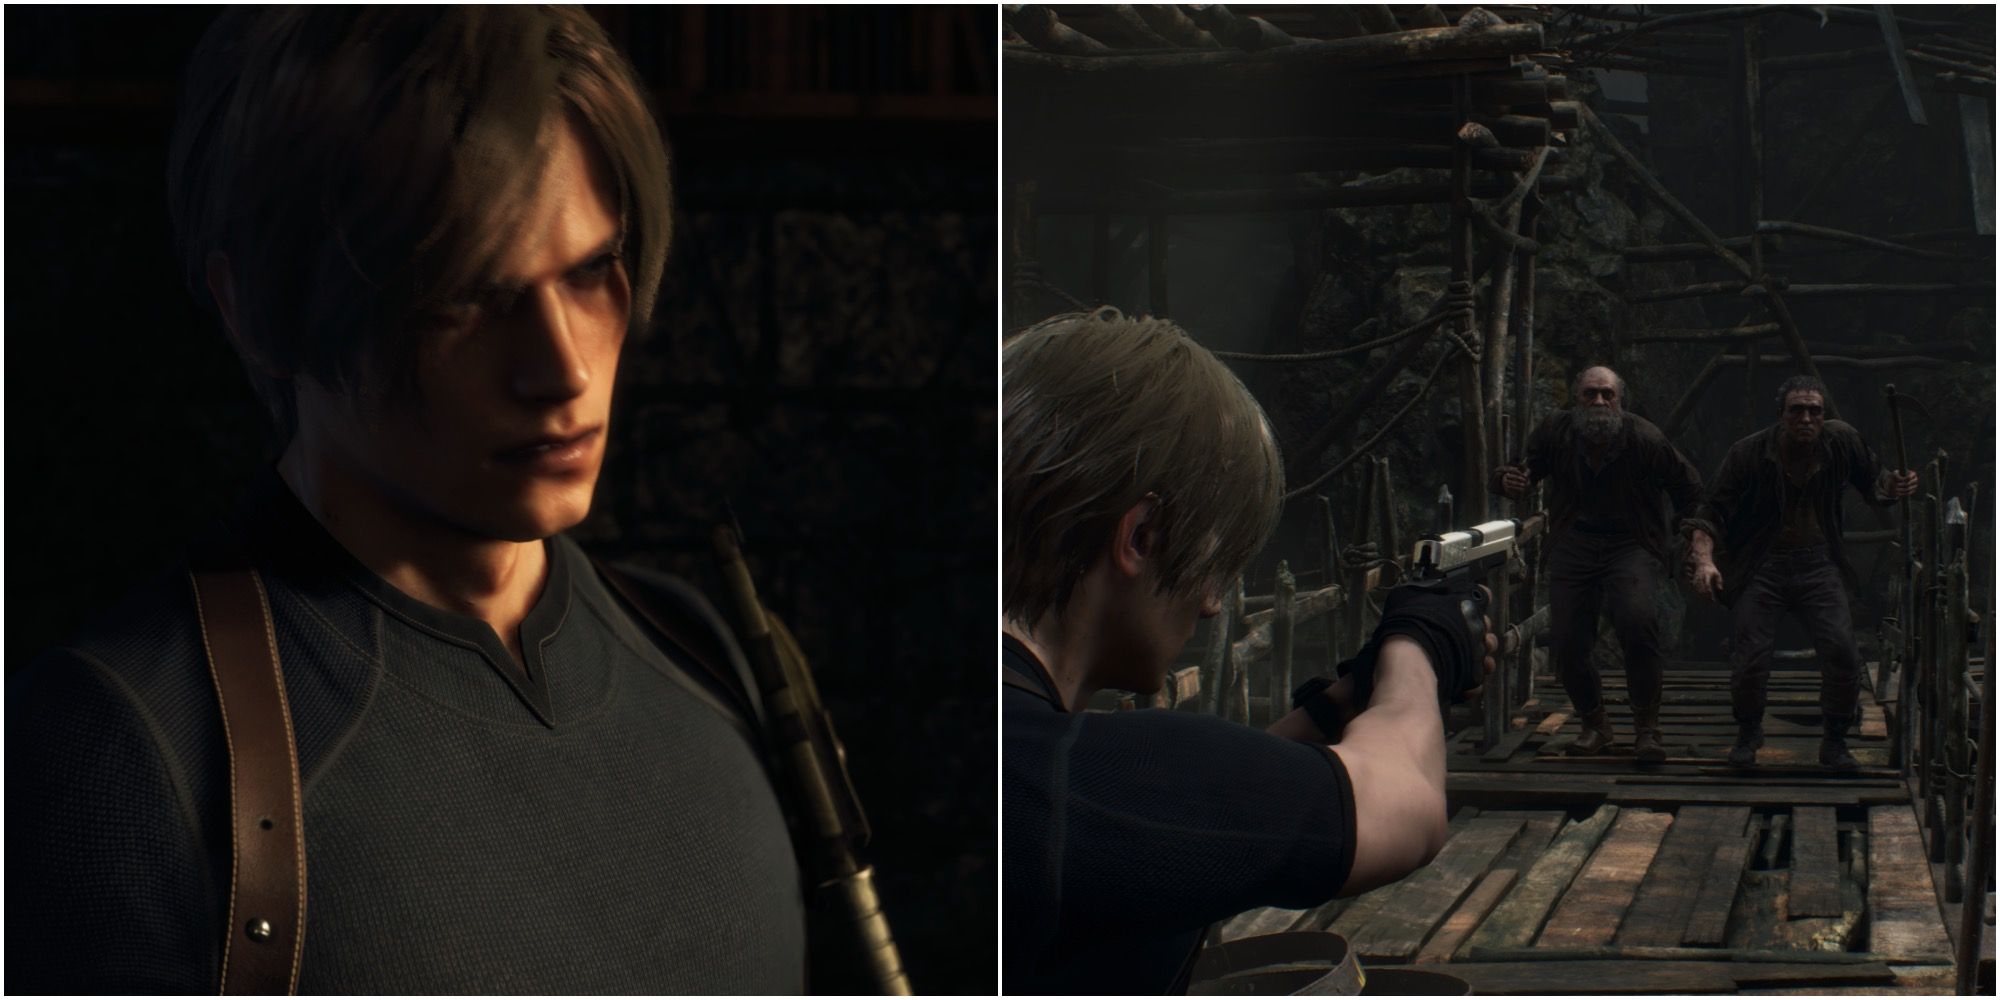 Resident Evil 4 remake beginner tips: 11 things to know before starting -  Polygon